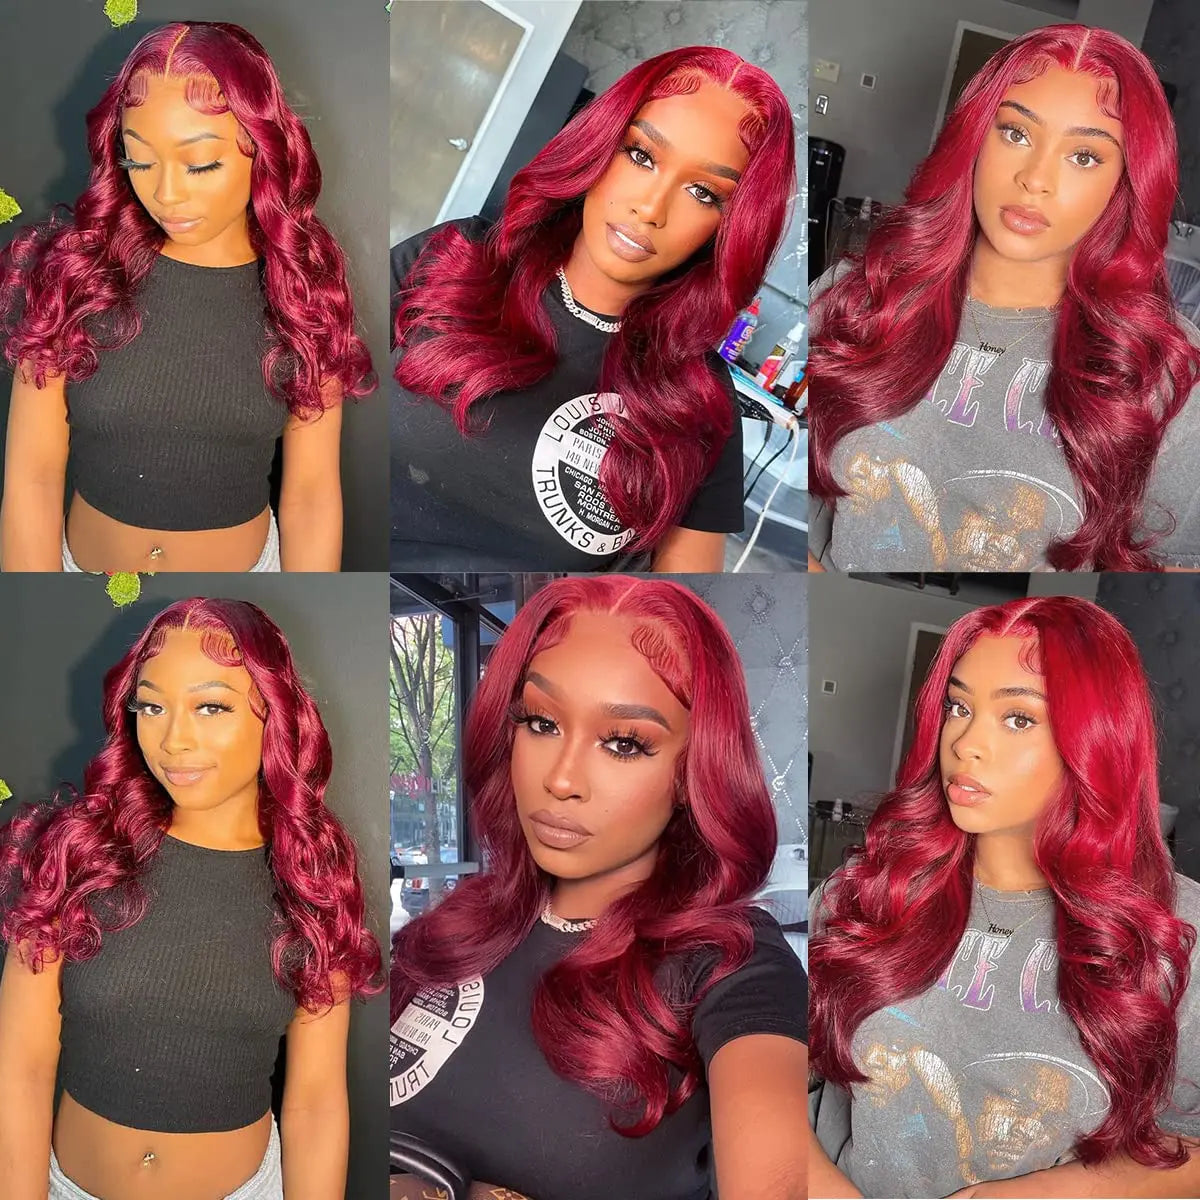 250% Body Wave Burgundy 13x6 Hd Lace Frontal Human Hair Wig For Women Glueless 99j Lace Front Brazilian Wigs On Sale Clearance